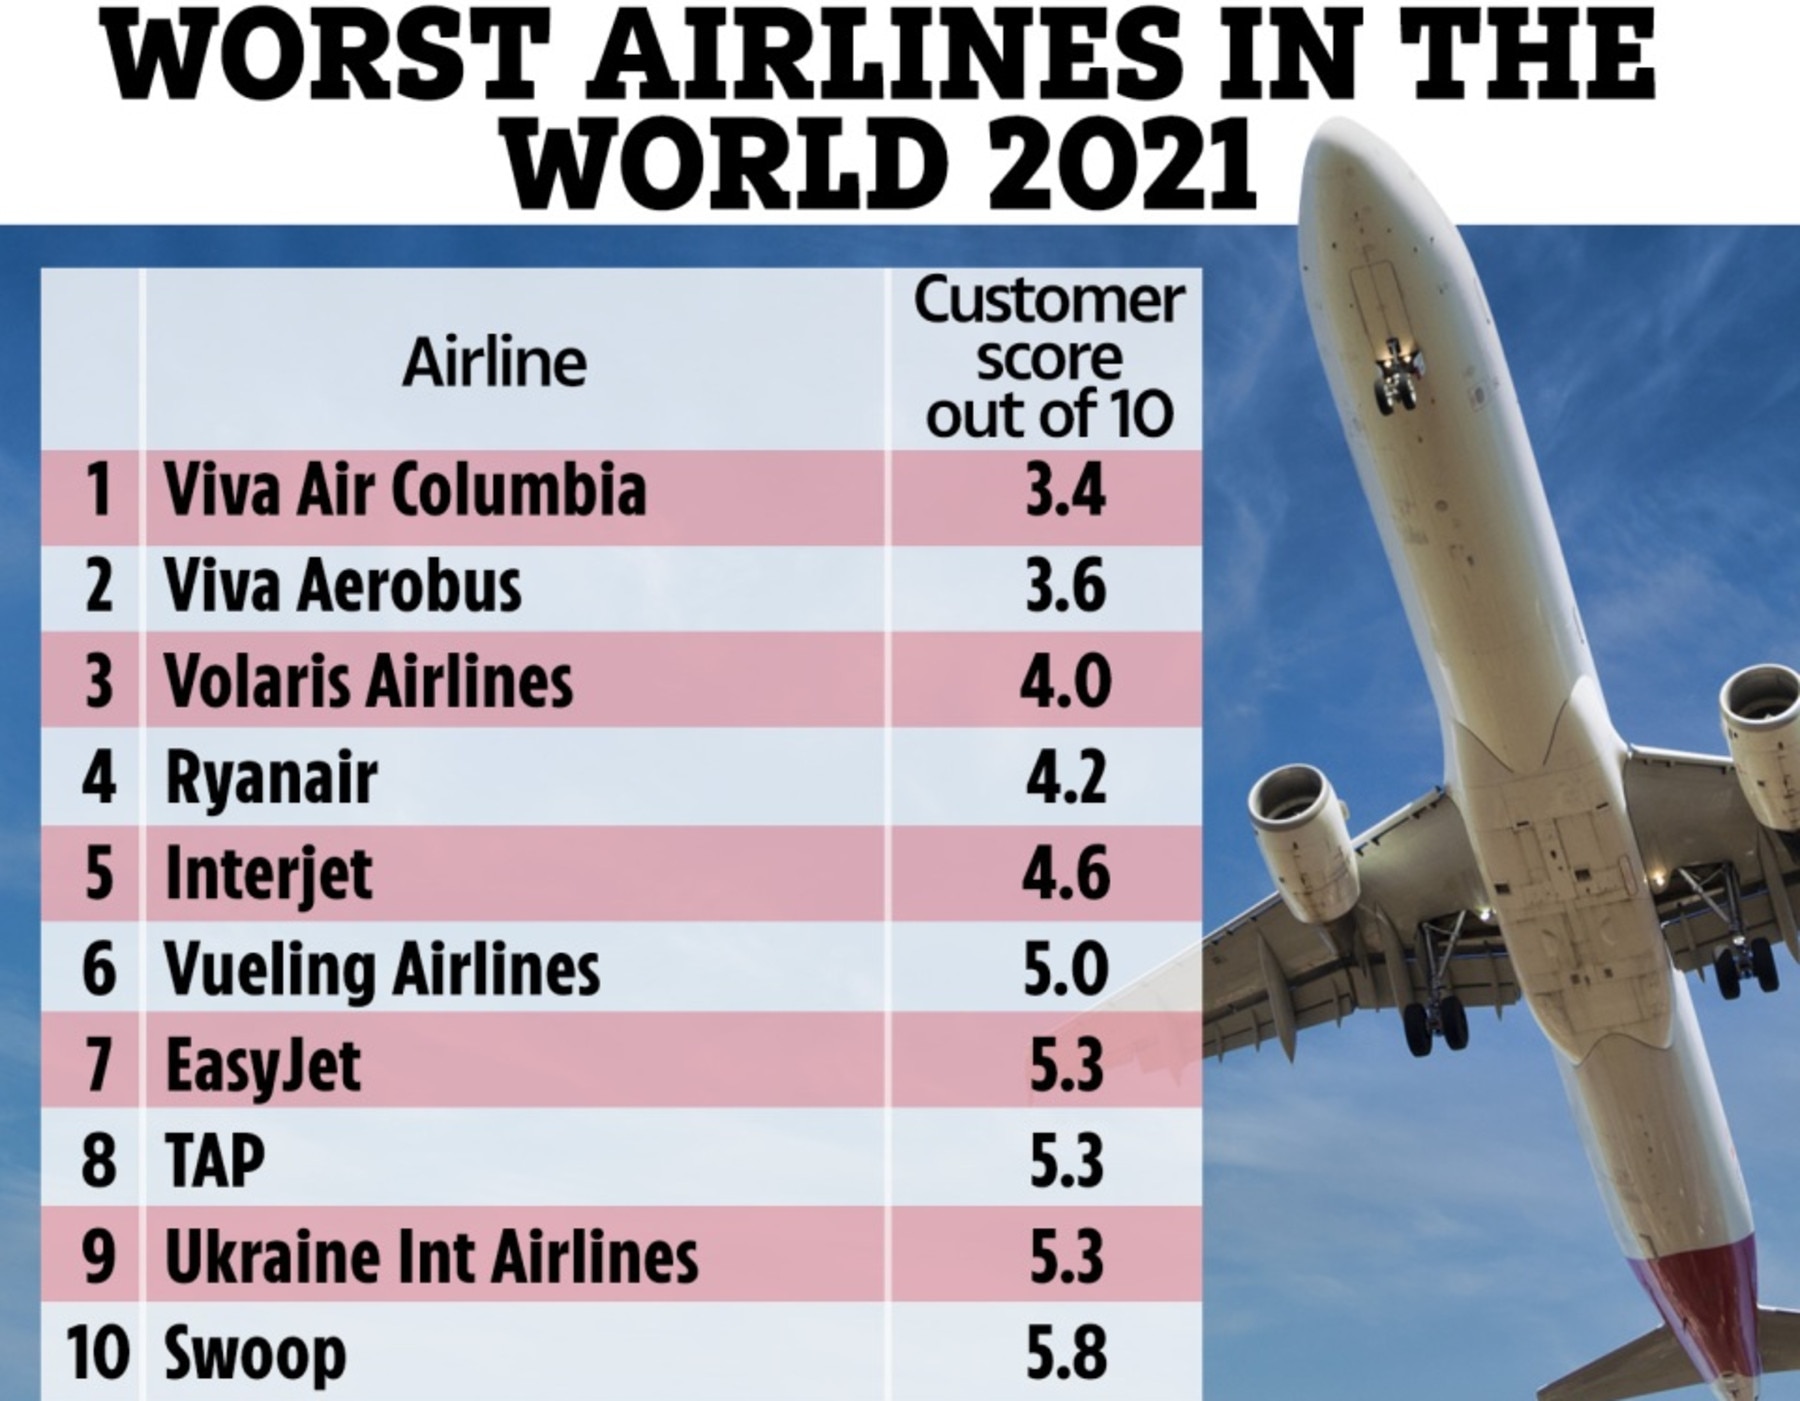 The 10 worst airlines in the world revealed List